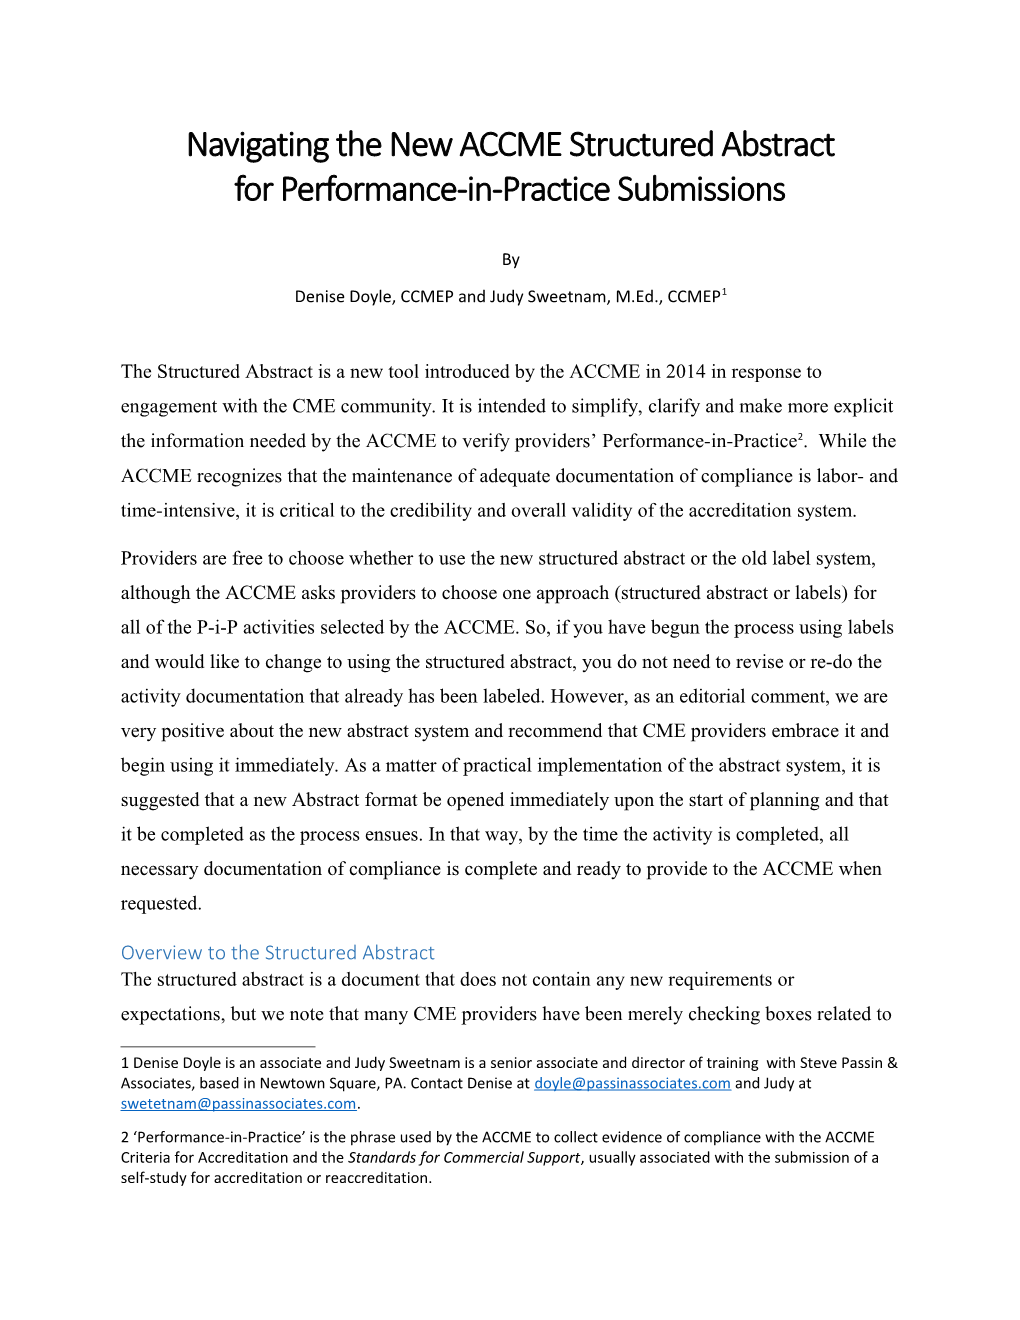 Navigating the New ACCME Structured Abstract for Performance-In-Practice Submissions